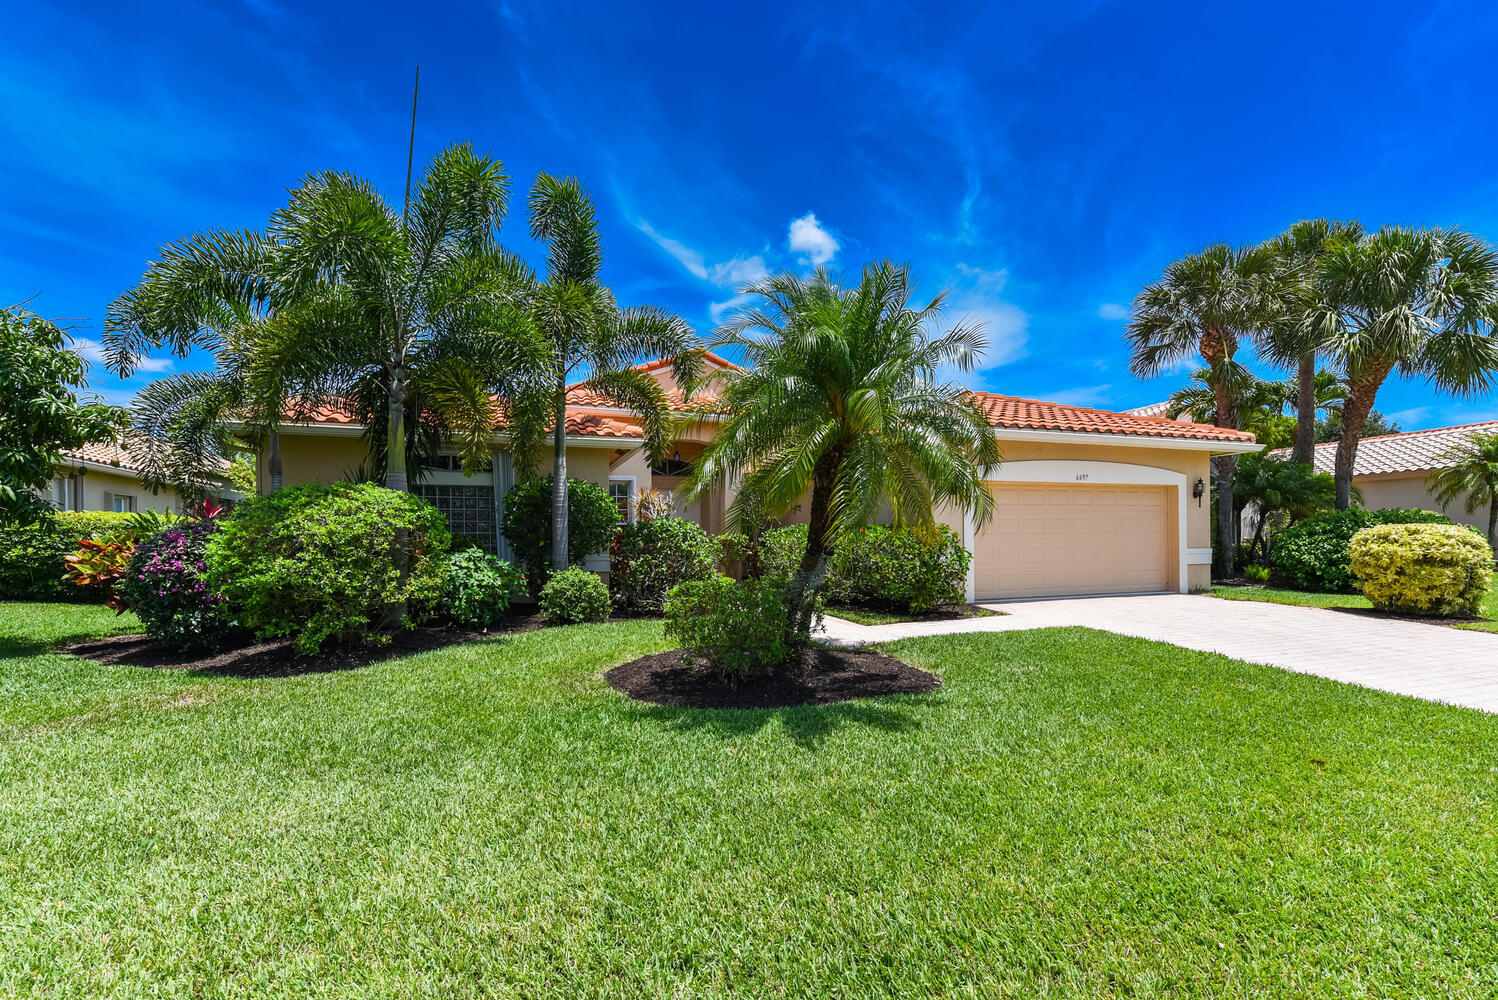 Florida's Real Estate Magic Buy and Sell with Ease